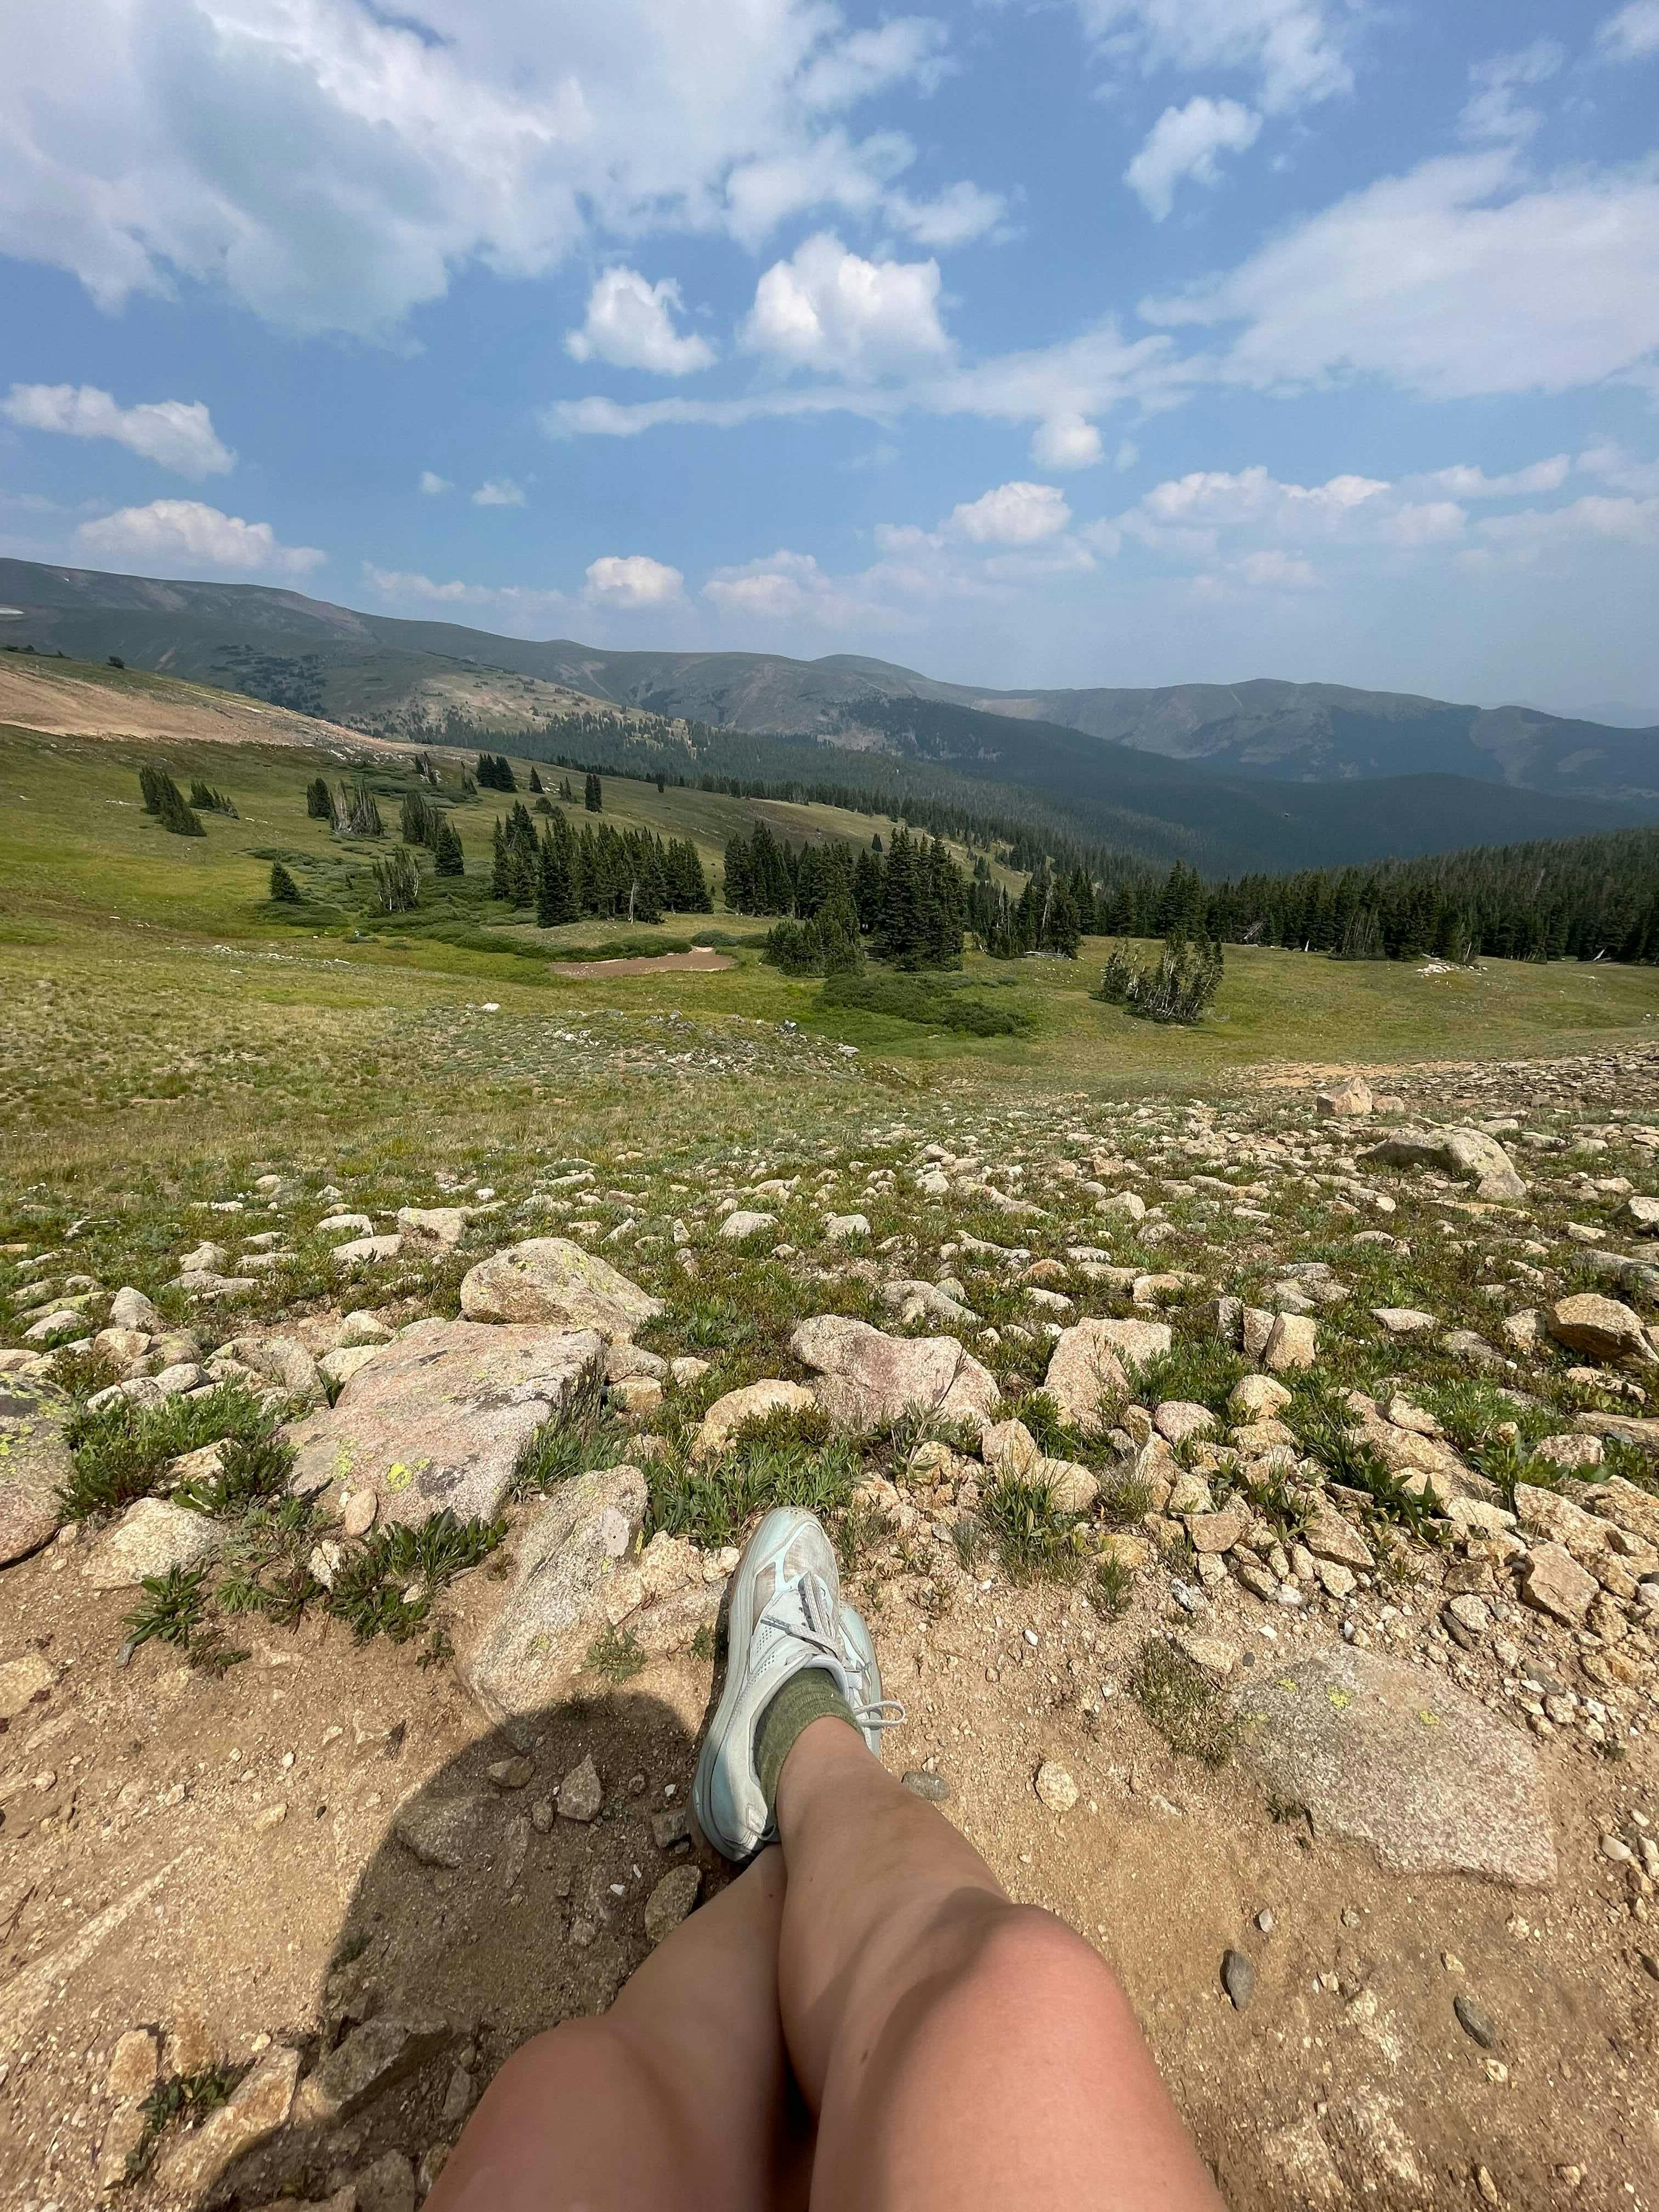 The author sits and we see her legs outstretched before an expansive view of the trail, a meadow, and hills in the distance. The sky is blue with white fluffy clouds. 